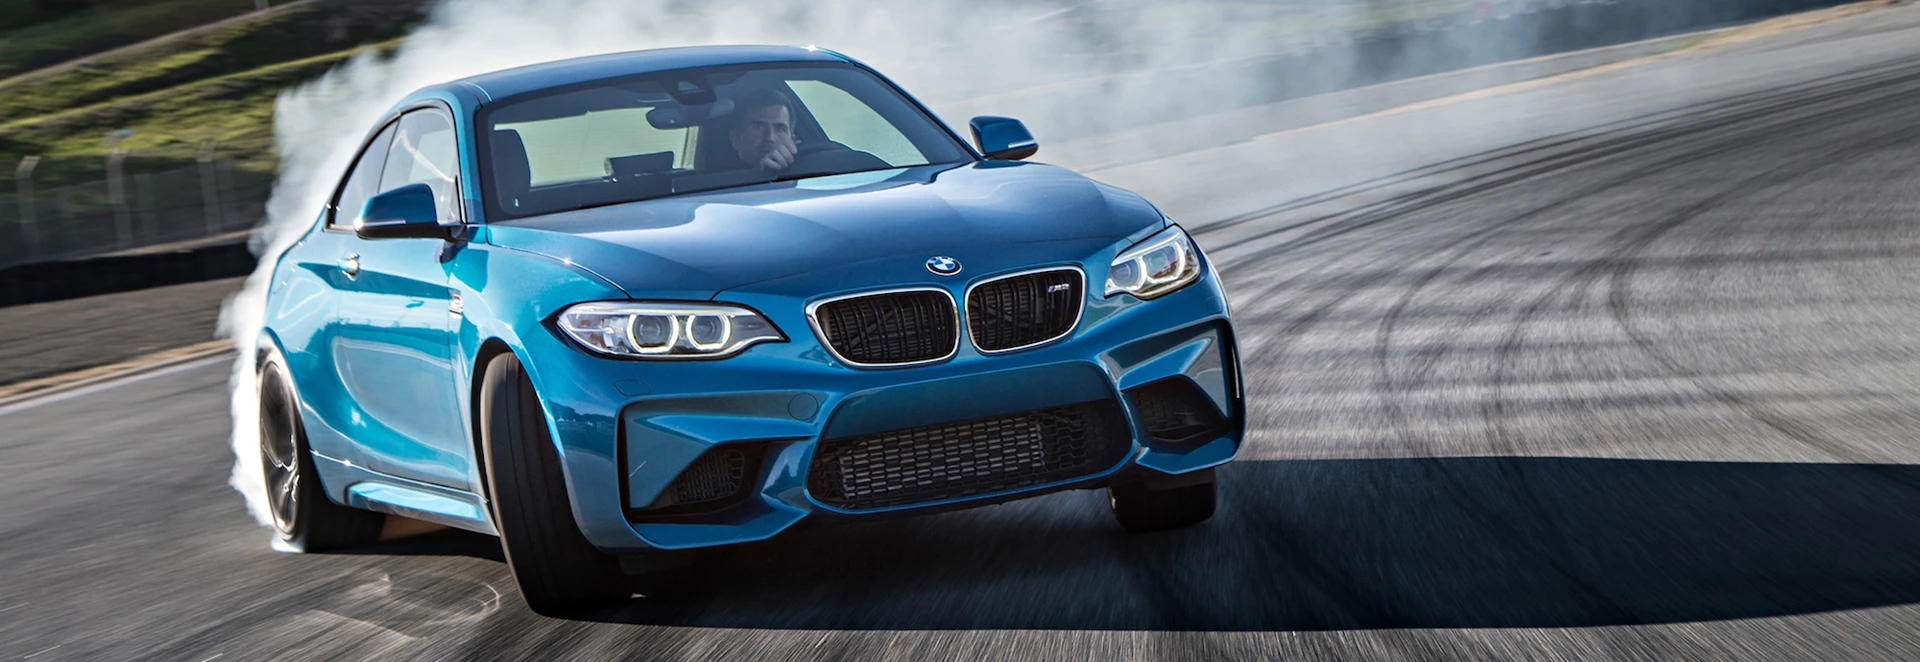 2018 BMW M2 review